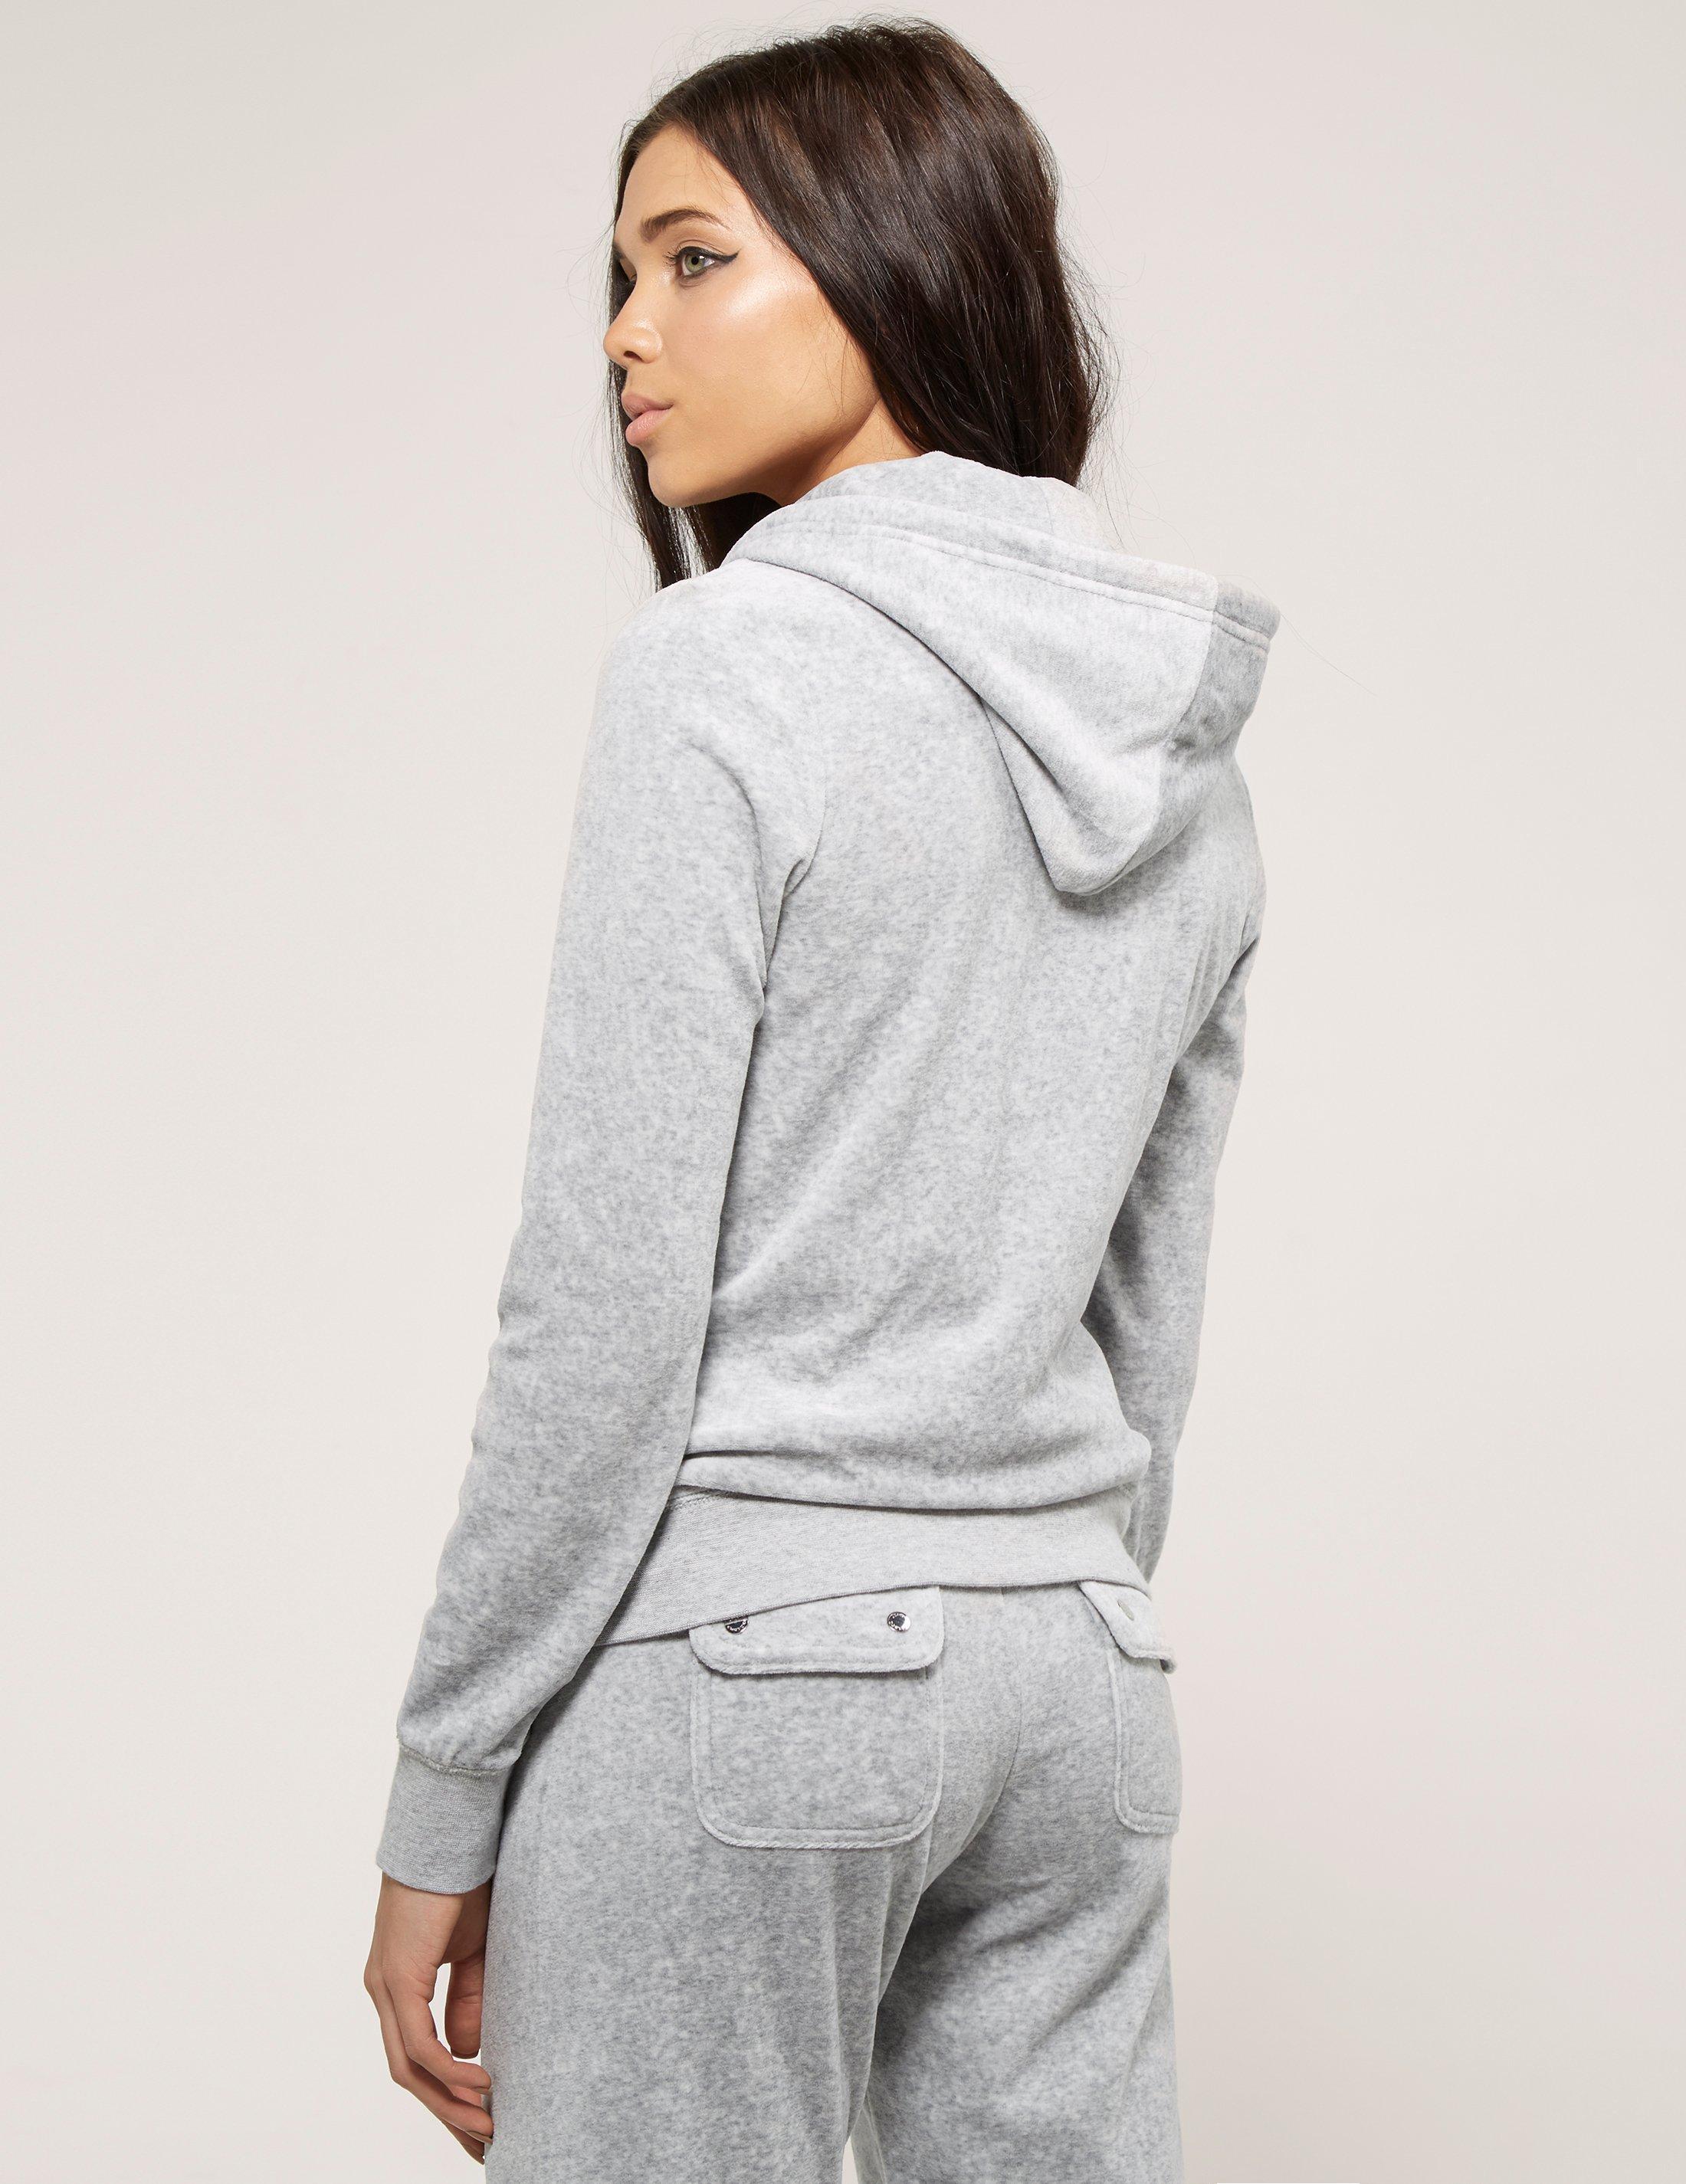 Lyst - Juicy Couture Robertson Velour Jacket in Gray